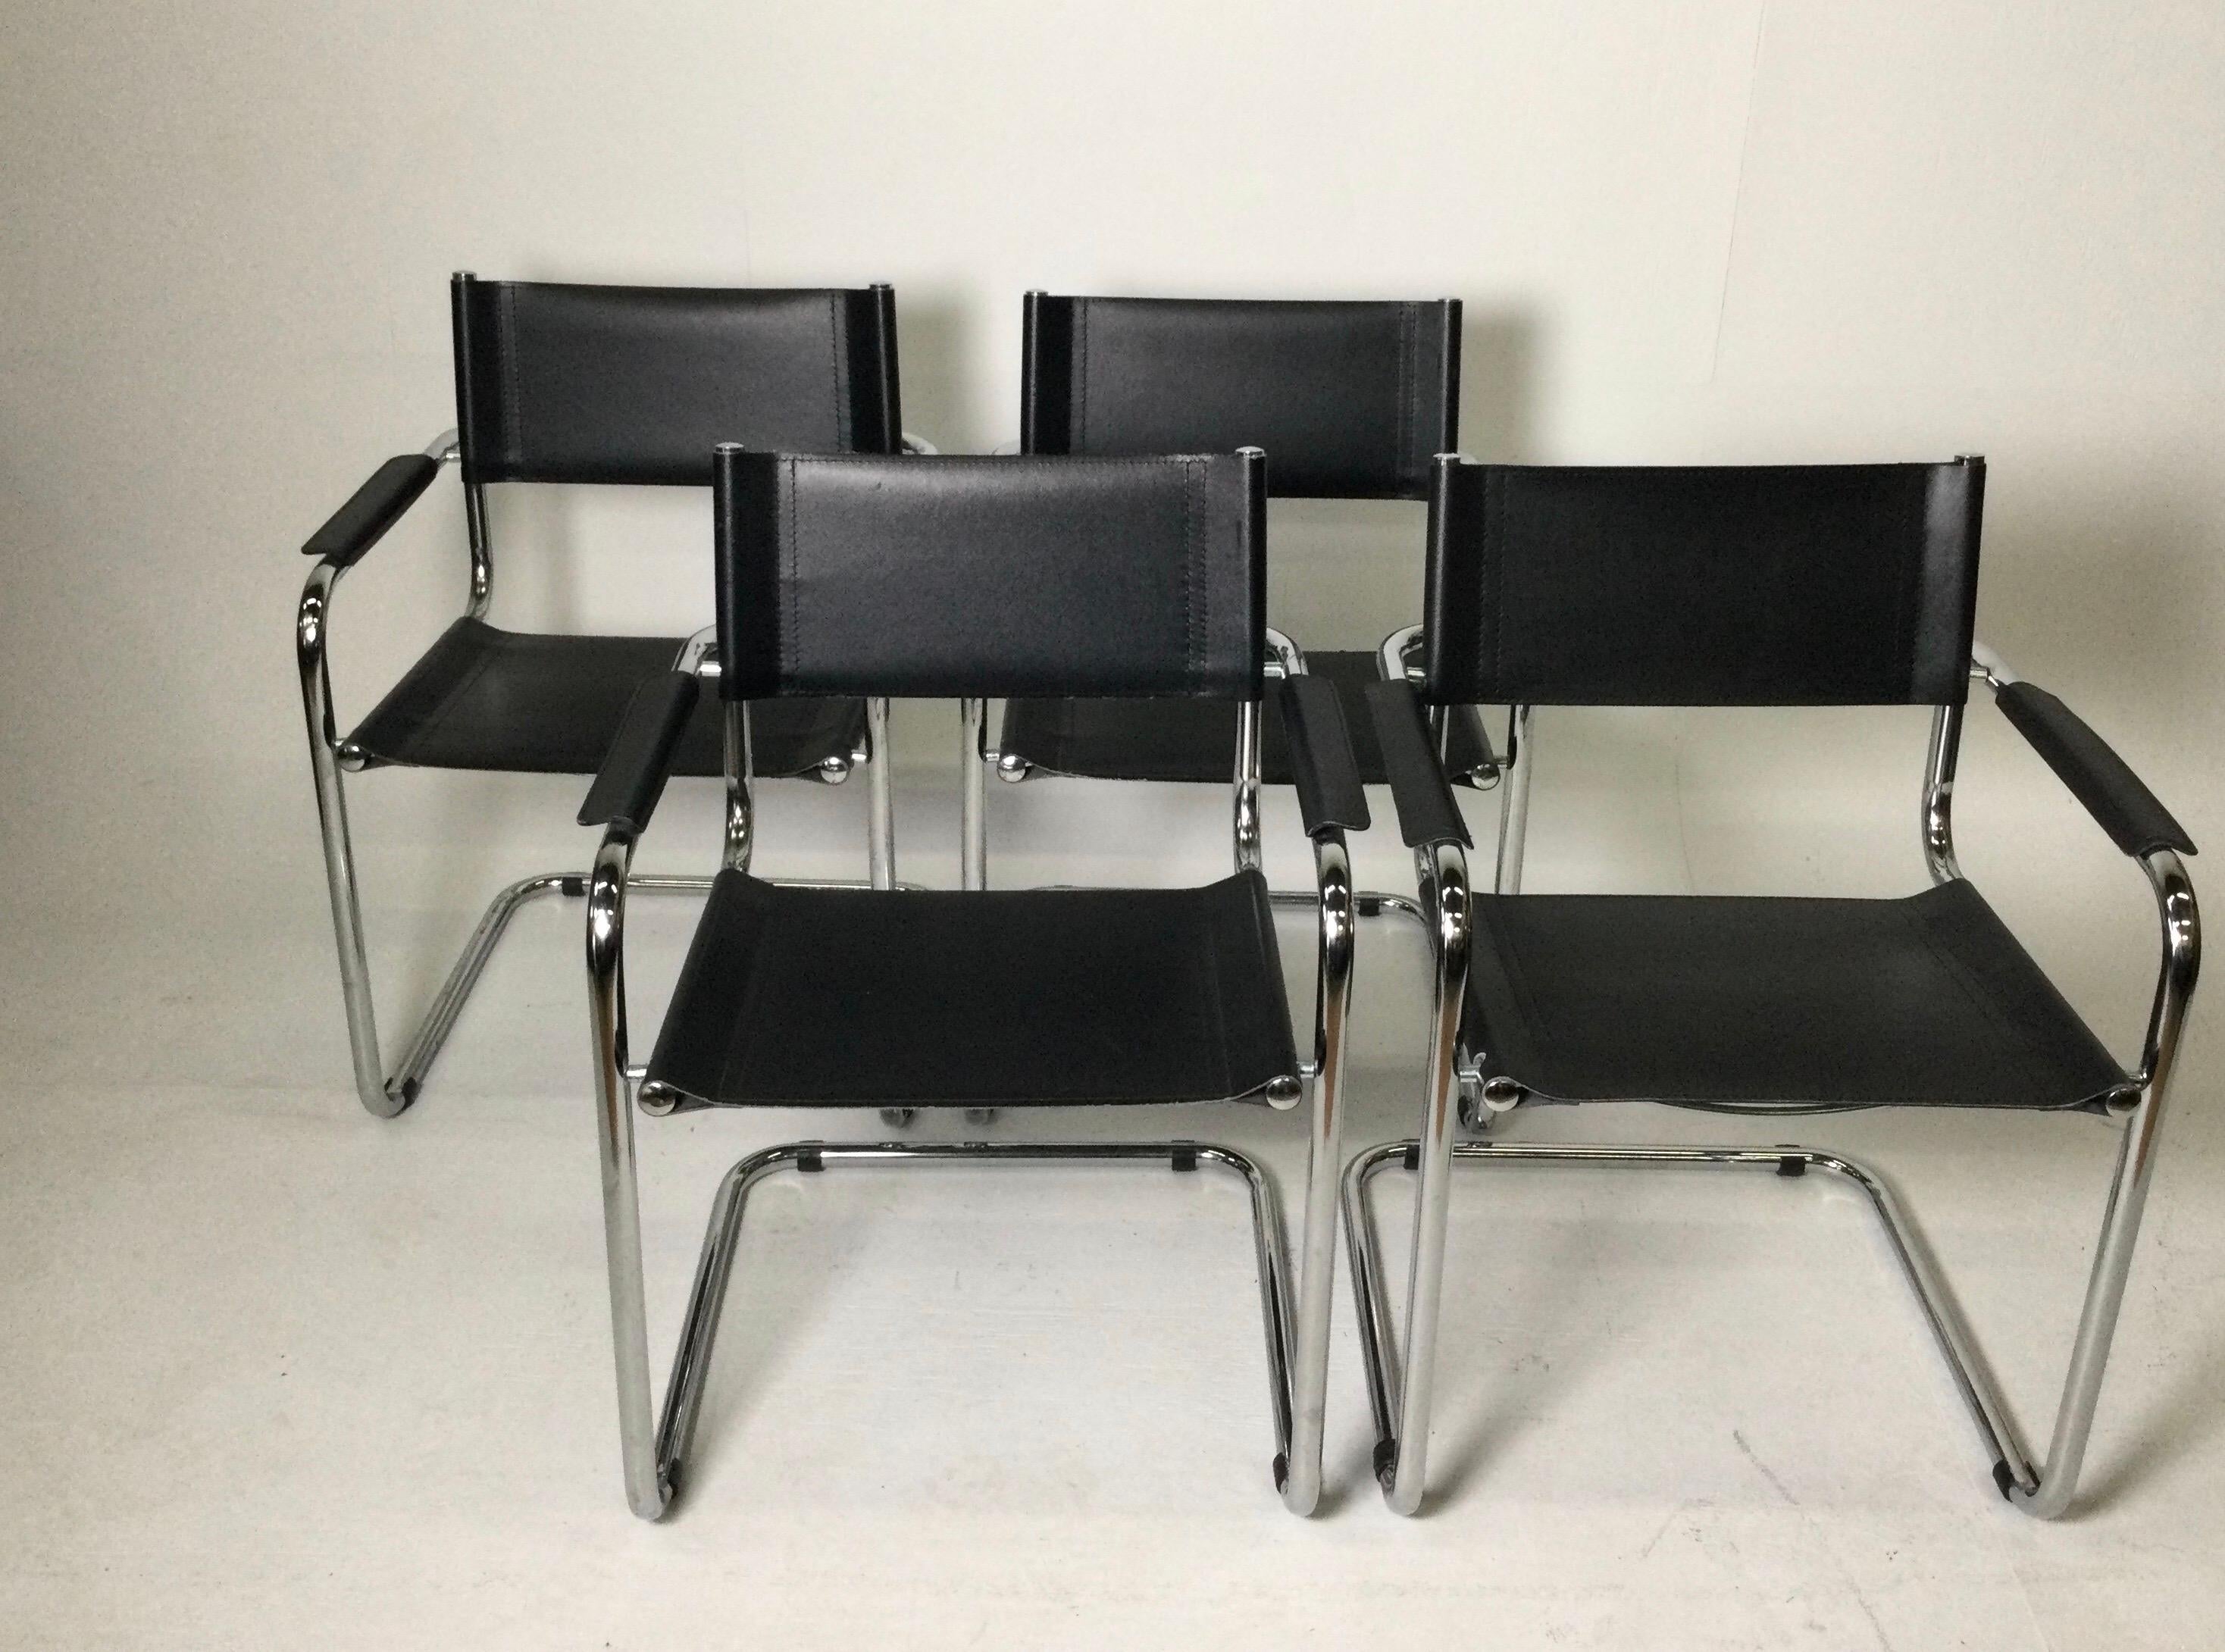 Setof 4 black leather chrome plated tubular steel Cantilever style arm chairs. Some still have paper labels on bottom. All marked Made in Italy on the underside of seat. Some age appropriate wear from use. Some light rust on the bottom chrome legs.